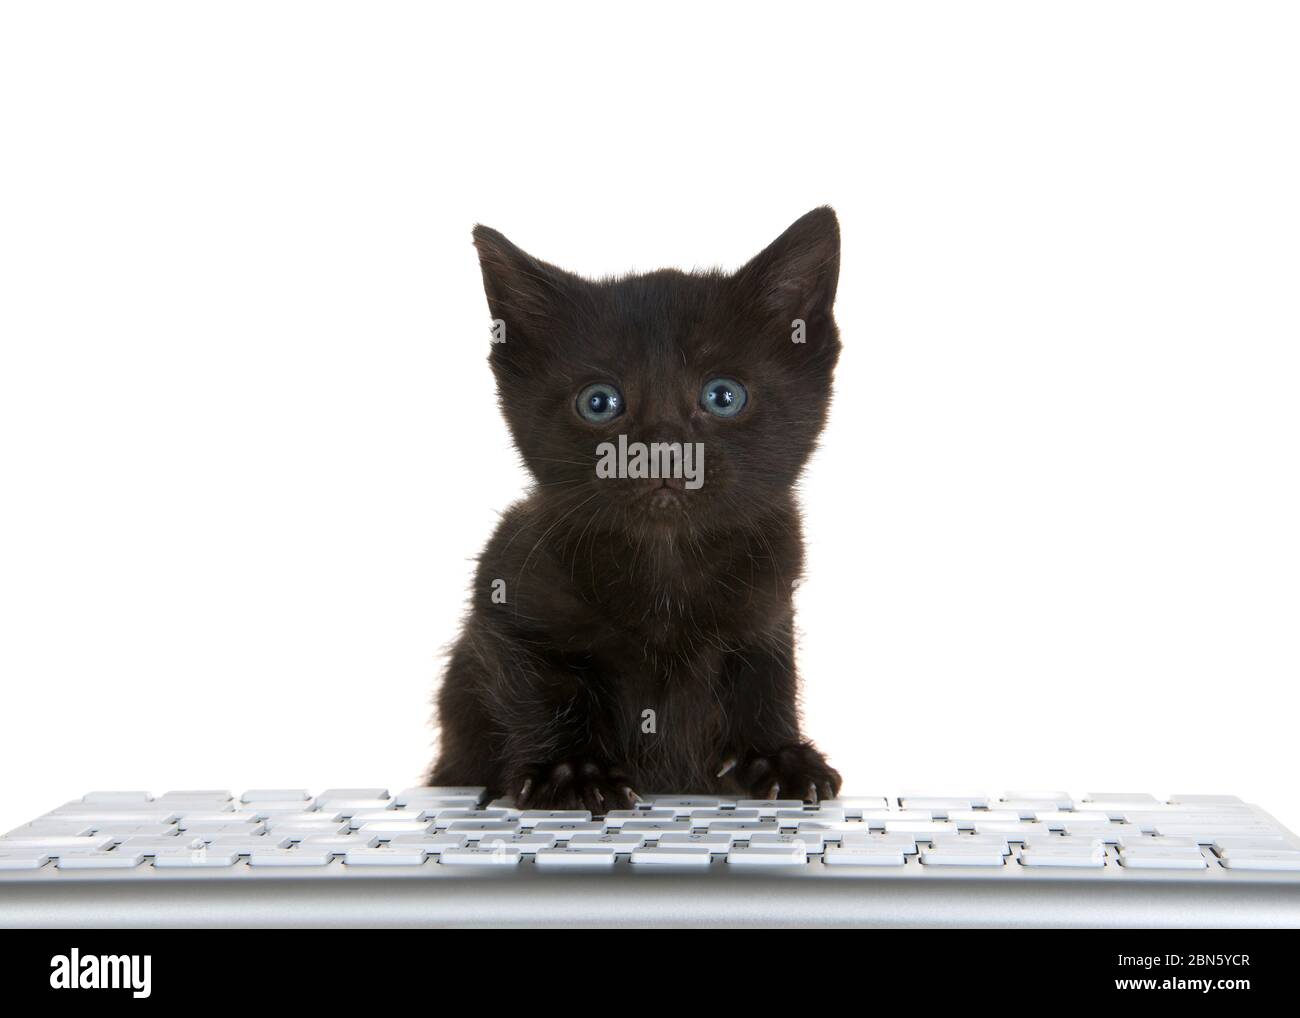 adorable tiny black kitten with blue eyes peaking over a computer keyboard isolated on white background, looking directly at viewer with perplexed exp Stock Photo